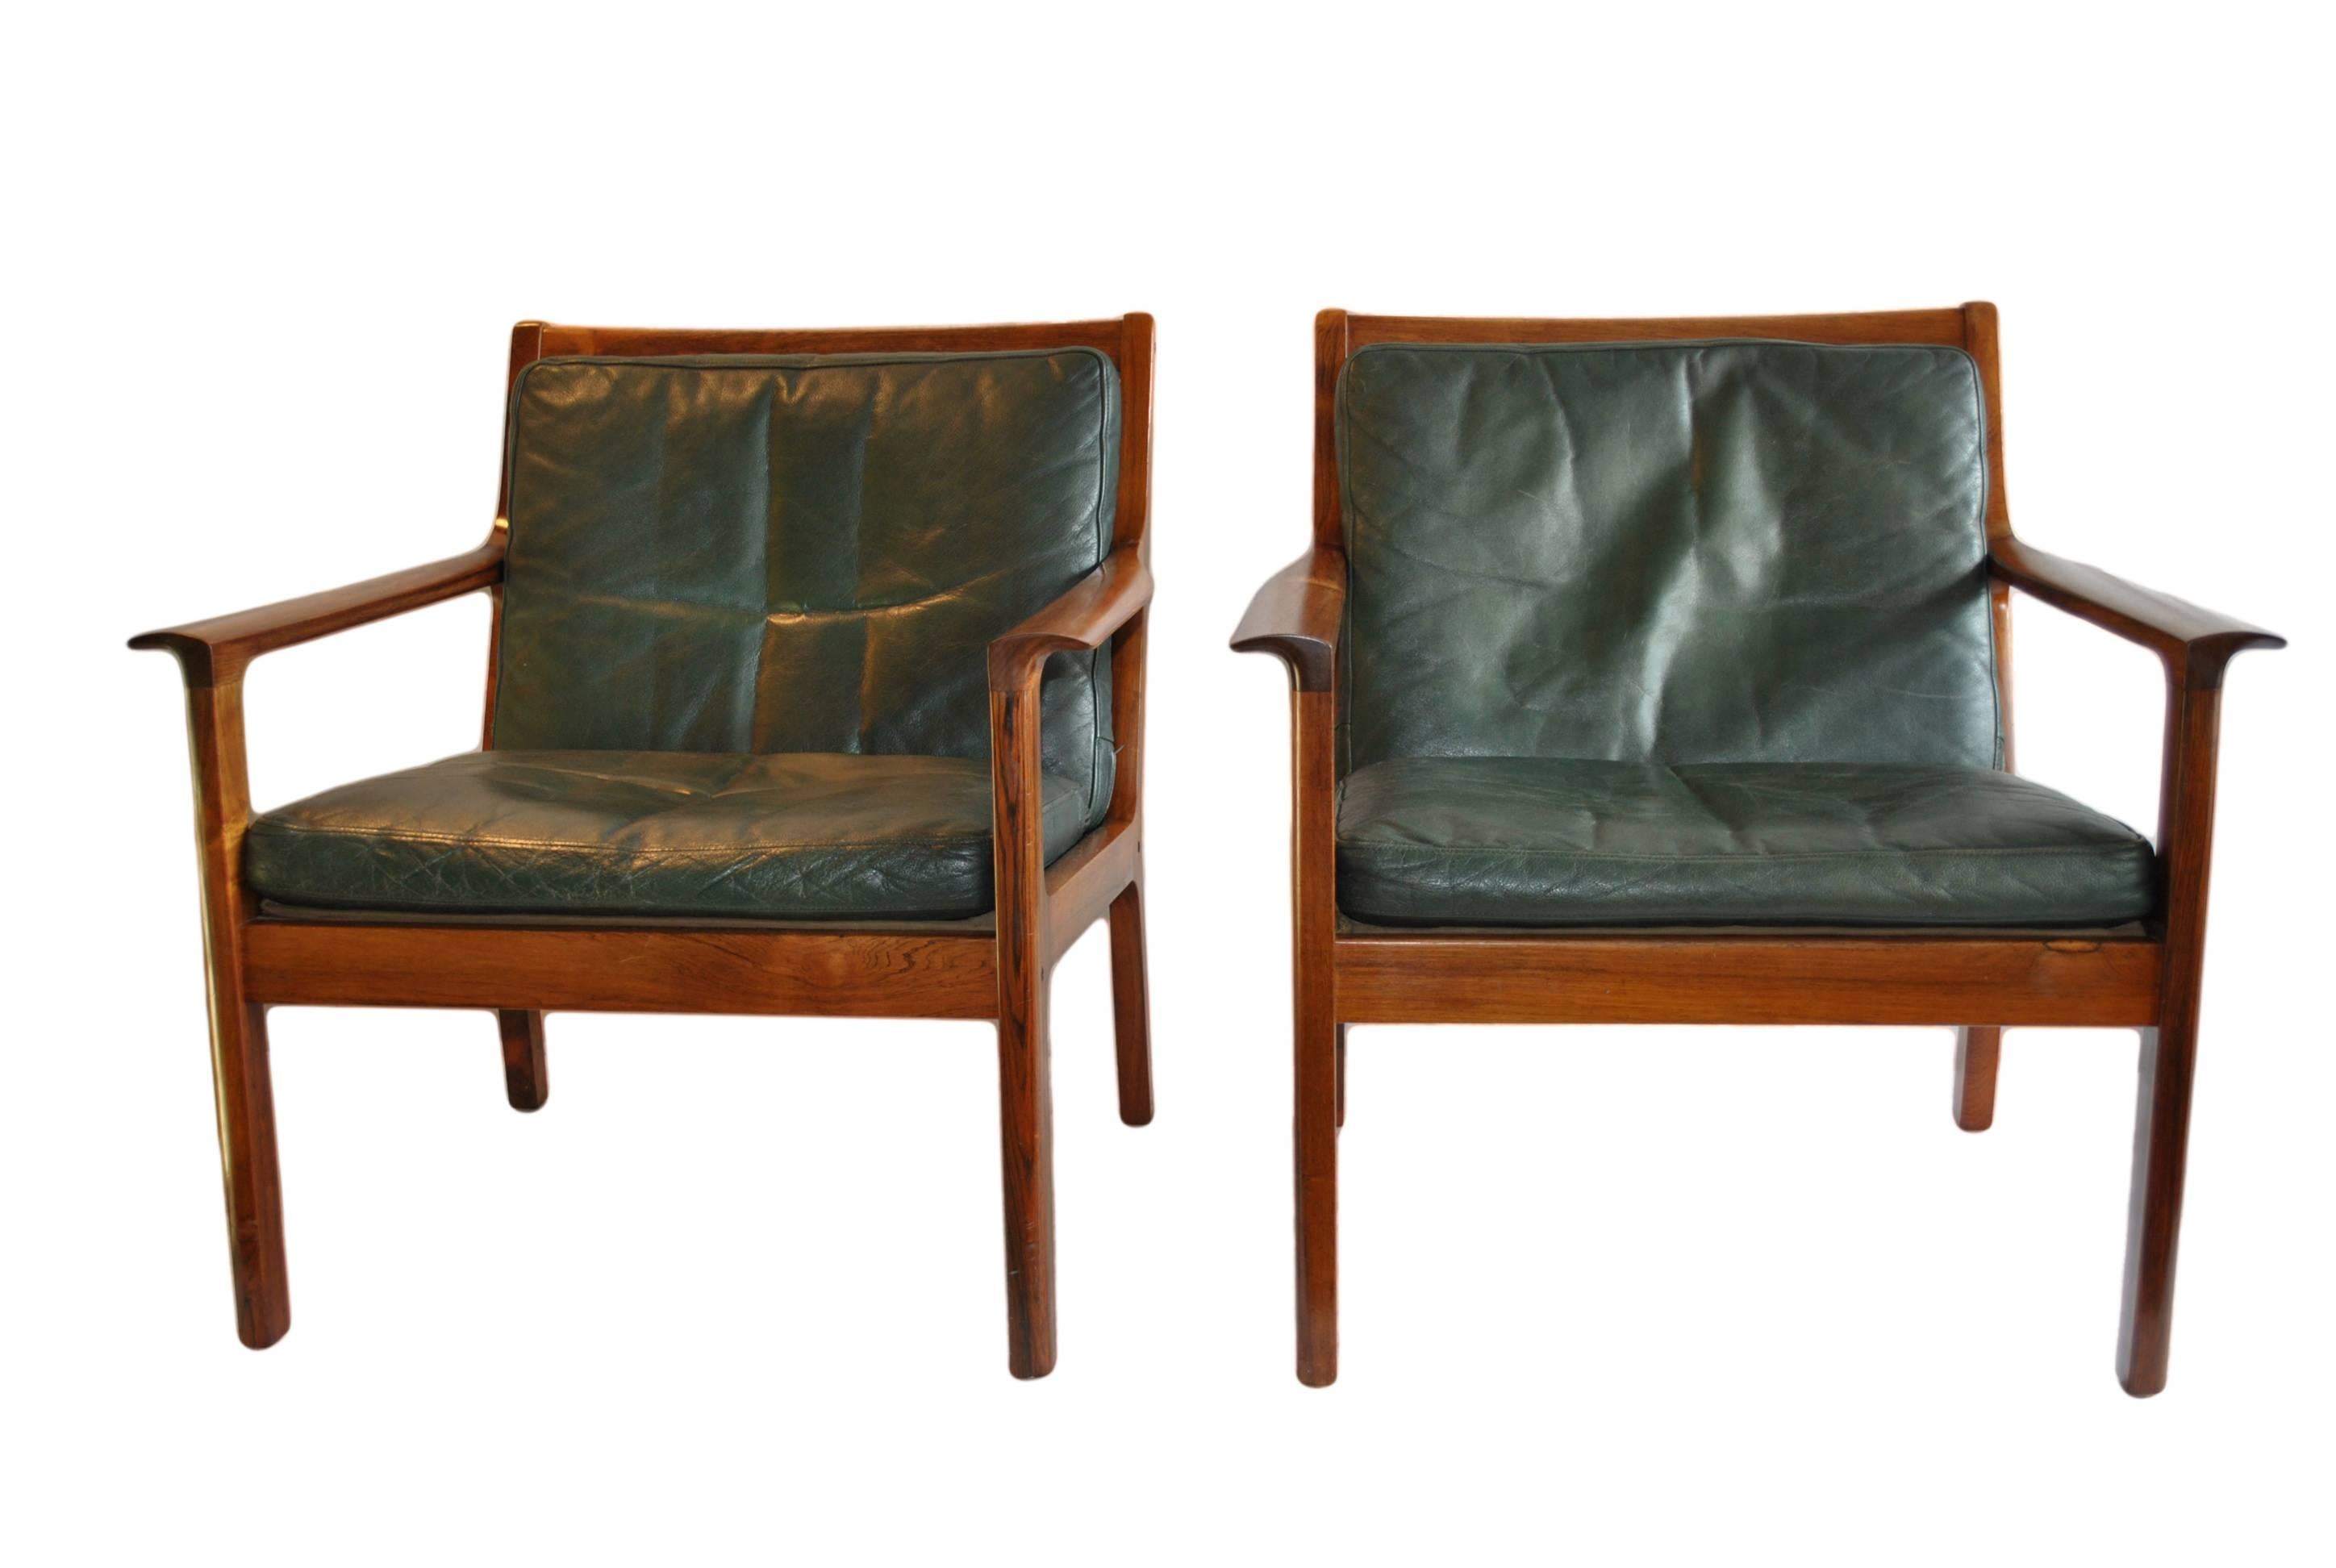 Superb pair of rare Frederik A Kayser easy chairs, Norway, 1965. Model 935 Produced by Vatne. Lovely grained rosewood and with original leather cushions, although this can be reupholstered in a leather/fabric of your choice.
Wonderfully sculpted